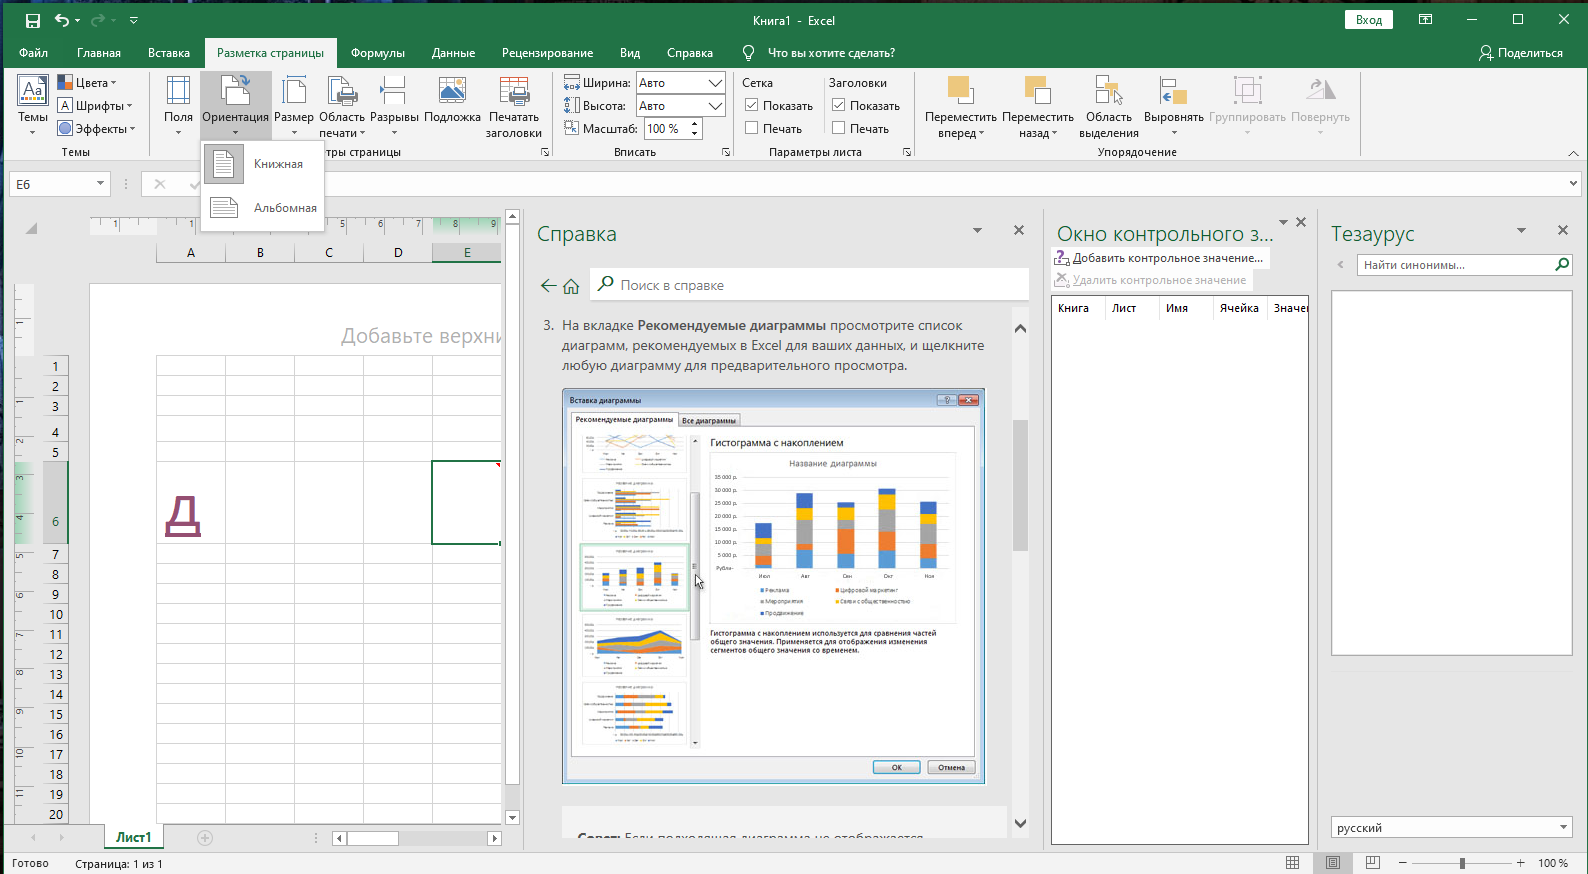 ms excel 2021